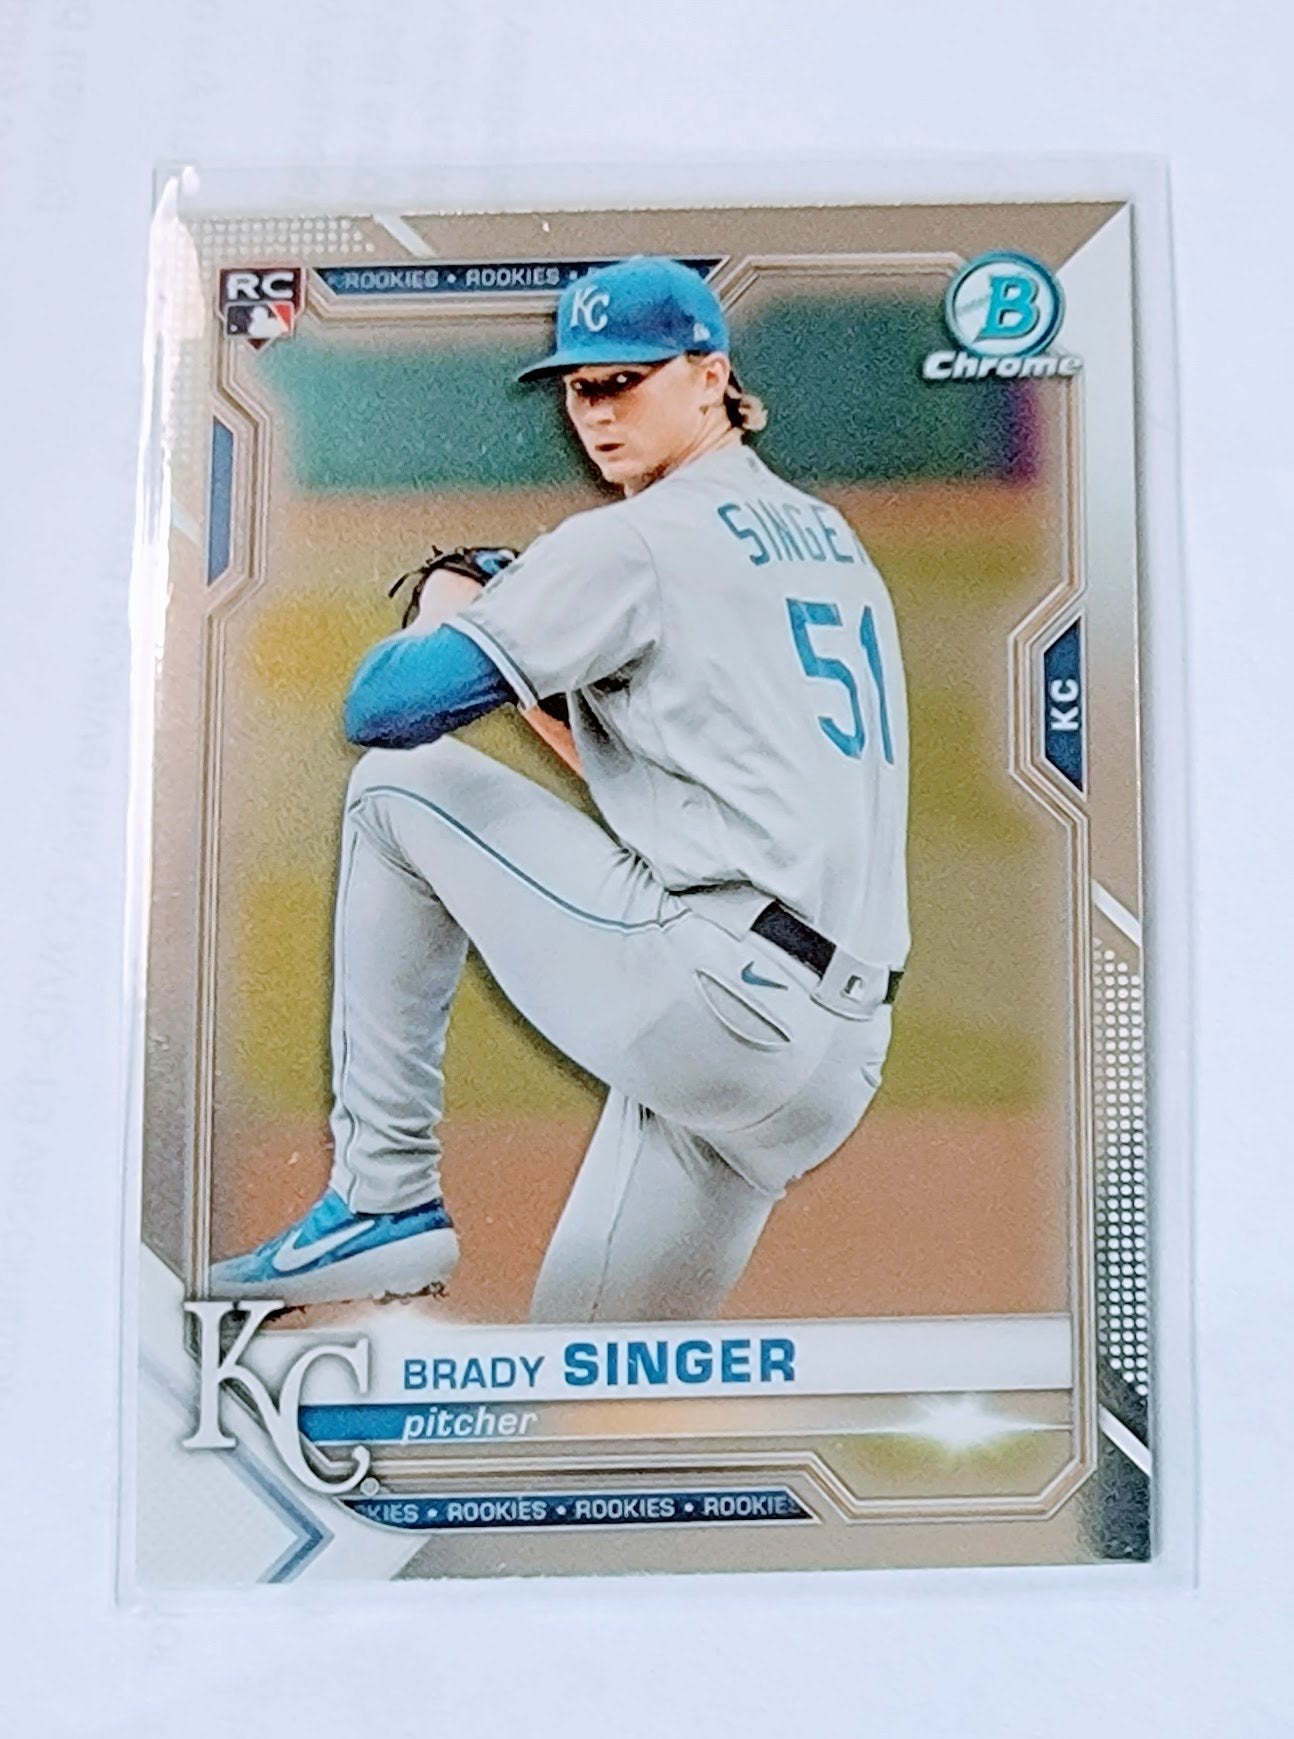 2021 Bowman Chrome Brady Singer Rookie Baseball Trading Card SMCB1 simple Xclusive Collectibles   